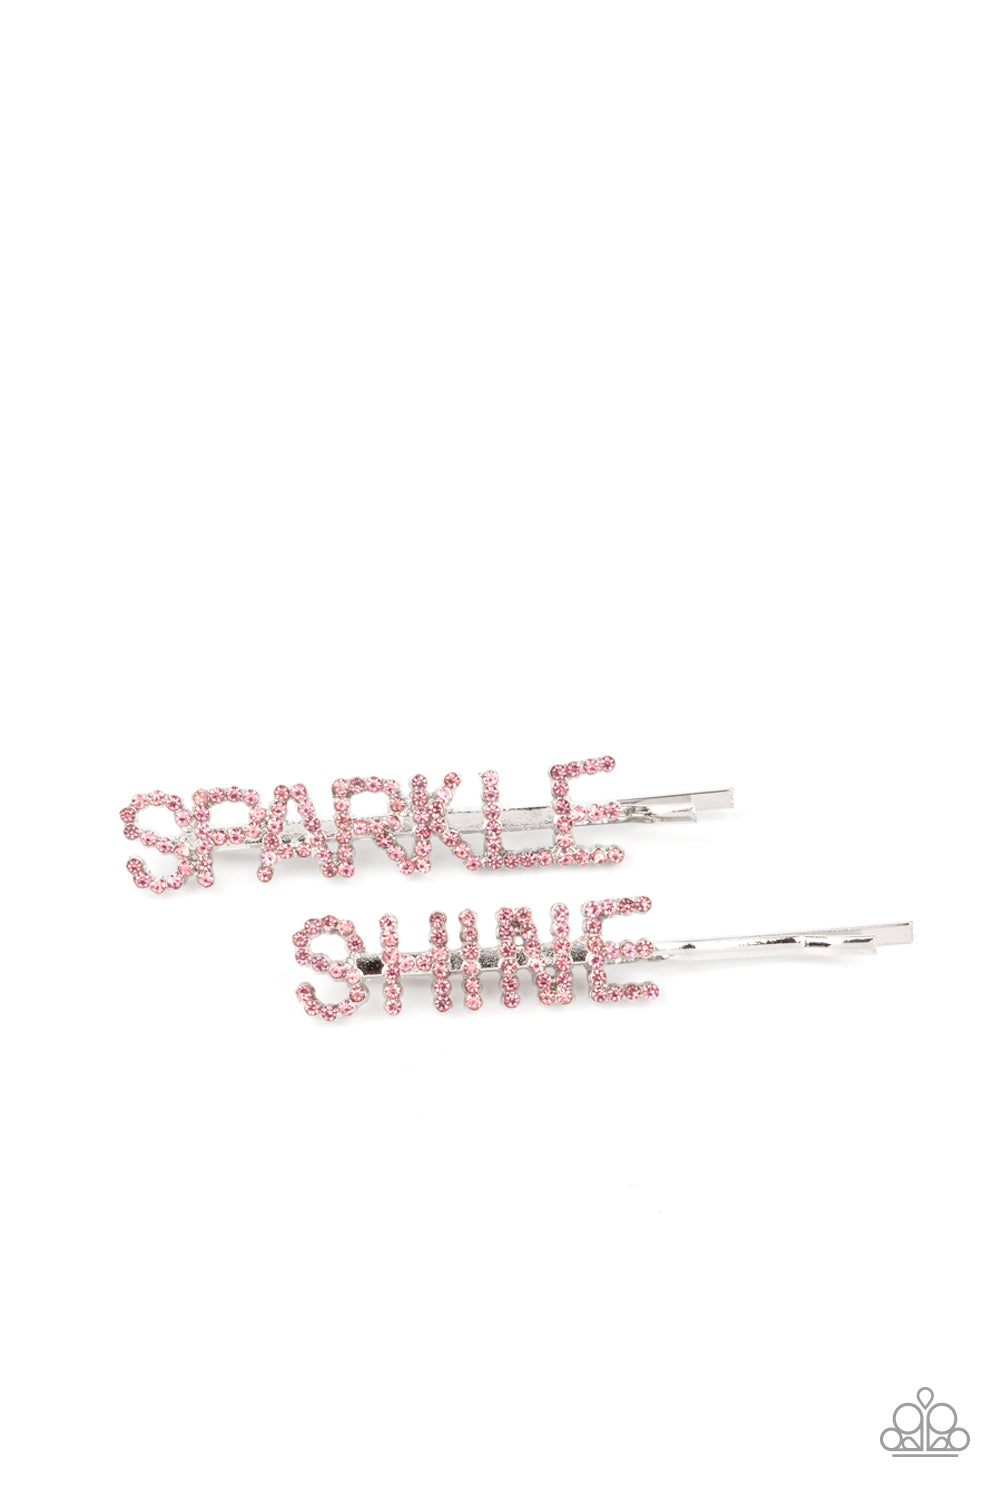 Center of the SPARKLE-verse - Pink Paparazzi Jewelry